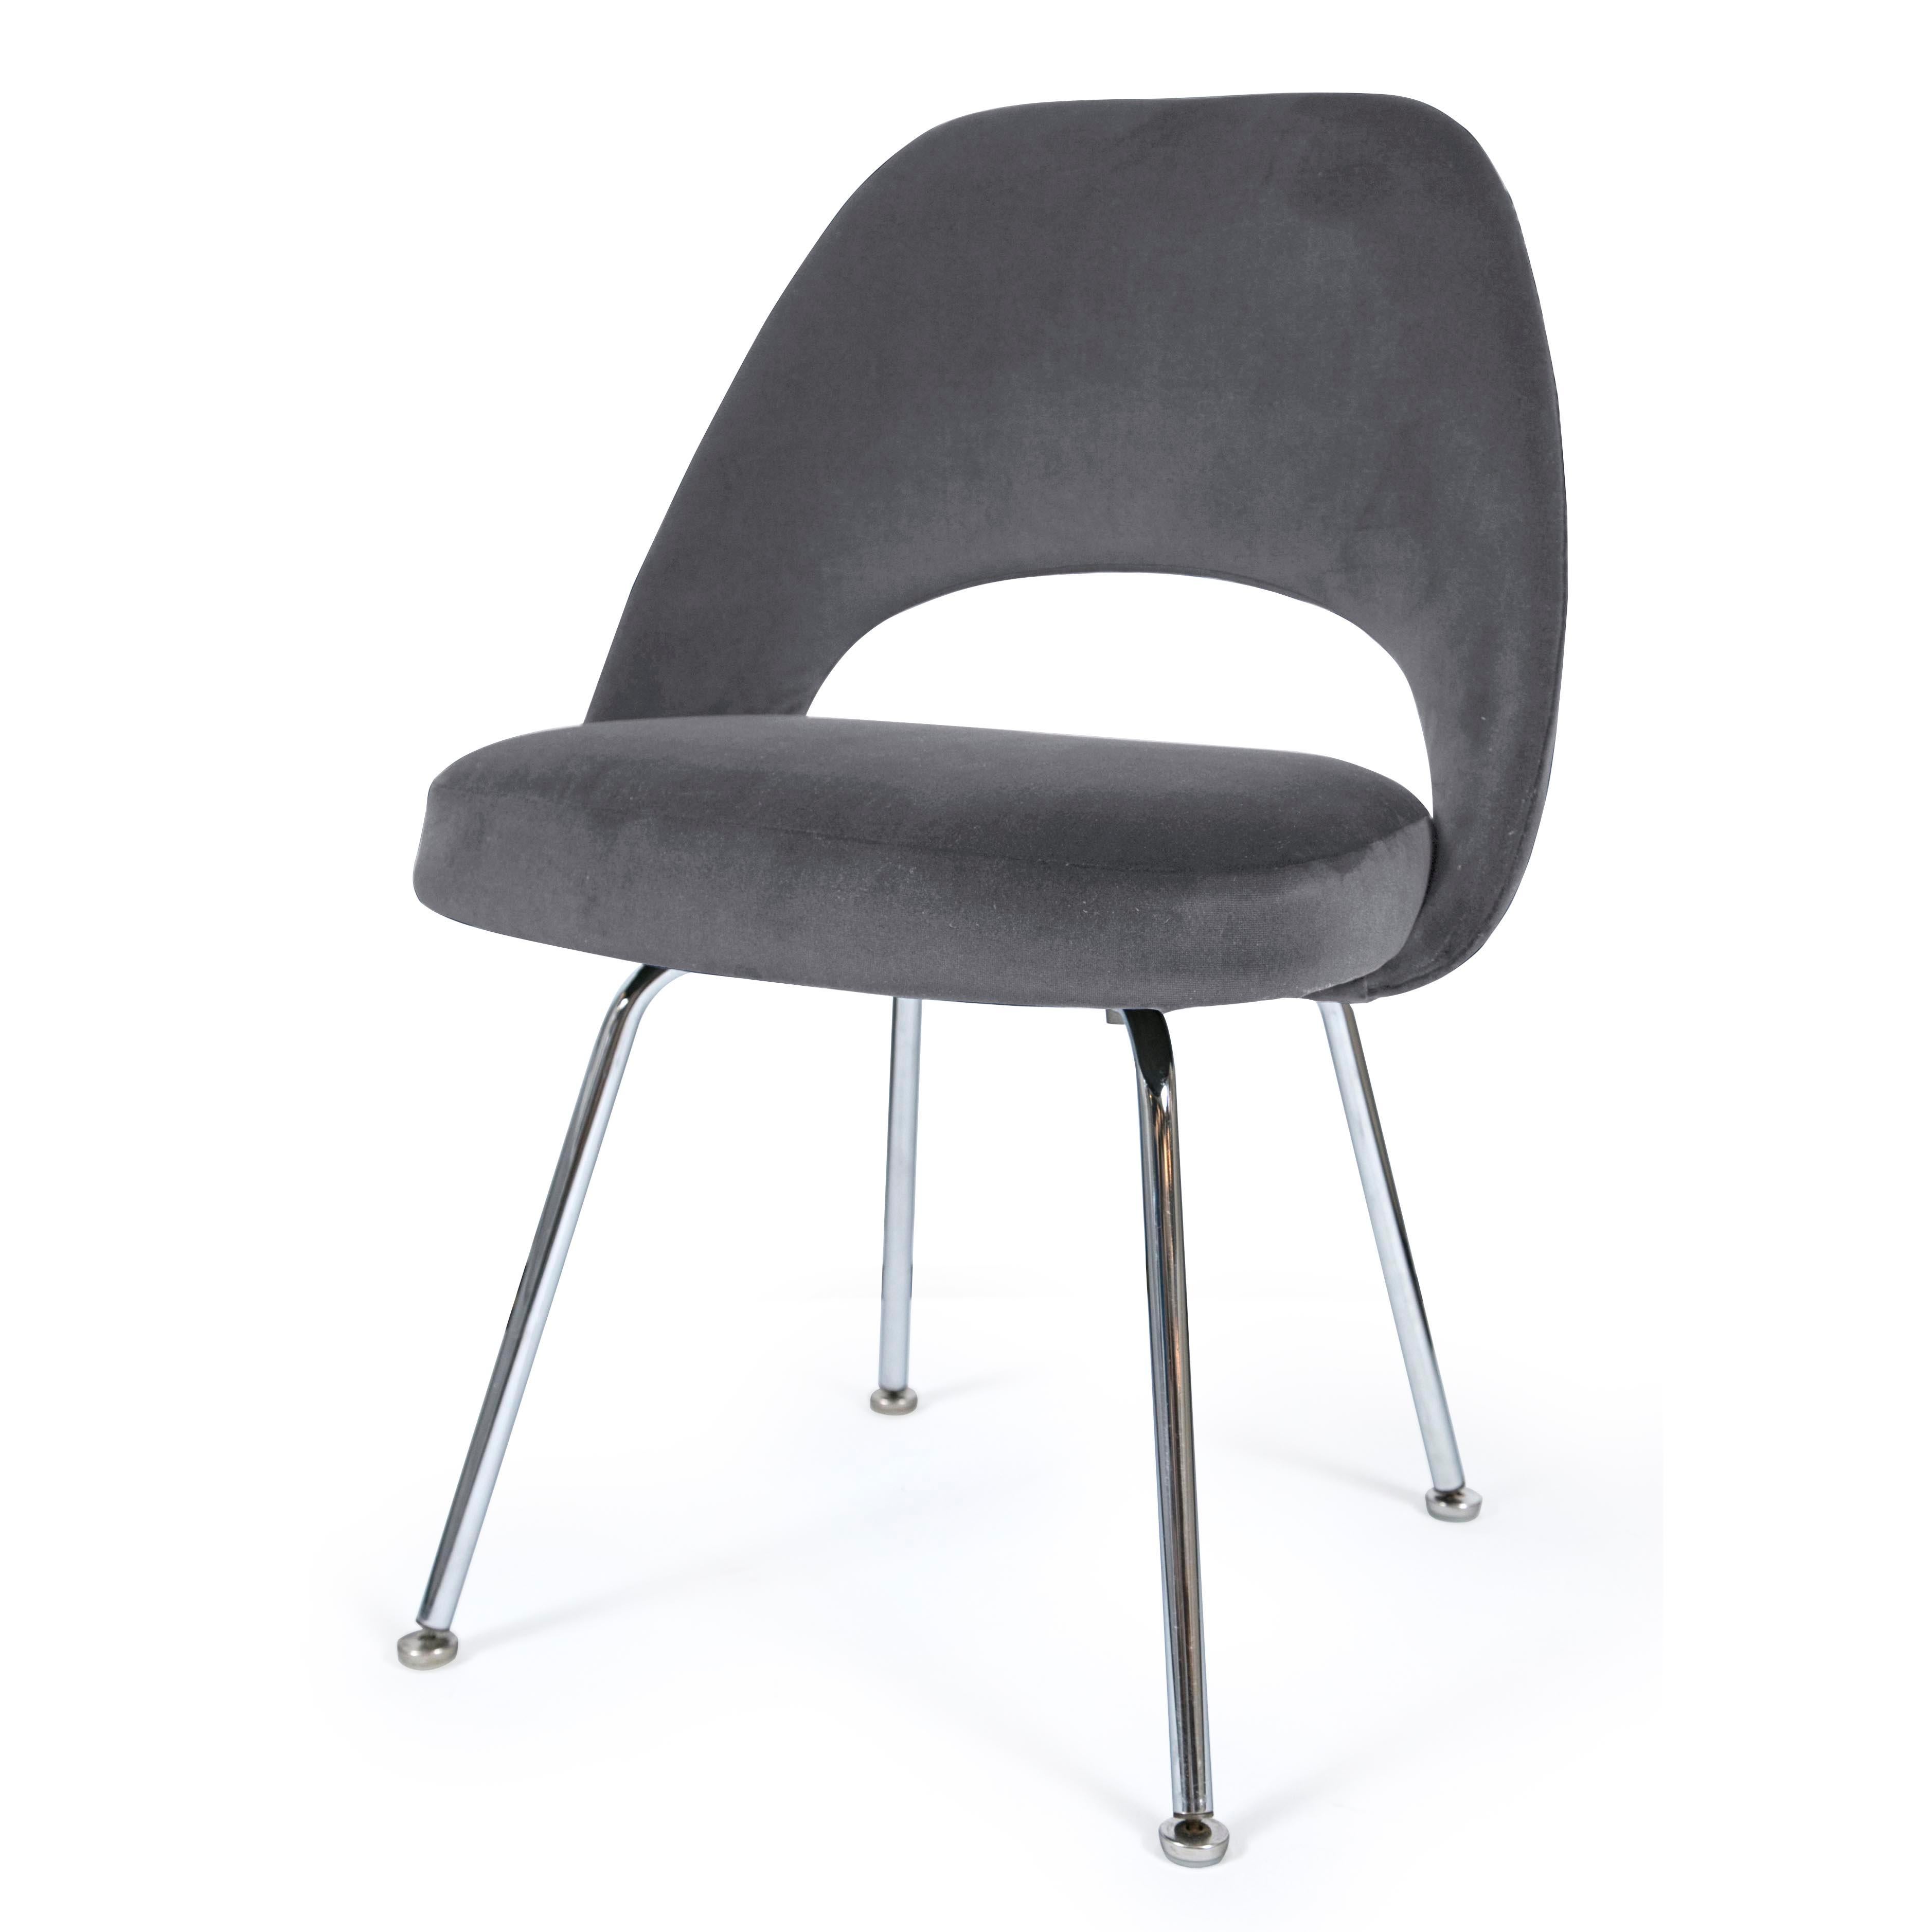 We have been restoring Saarinen Executive Chairs for years in every fabric one can imagine. We’ve restored these side chairs with polished steel tubular legs, using our stunning collection of Italian cotton velvets. In addition to new fabric, the